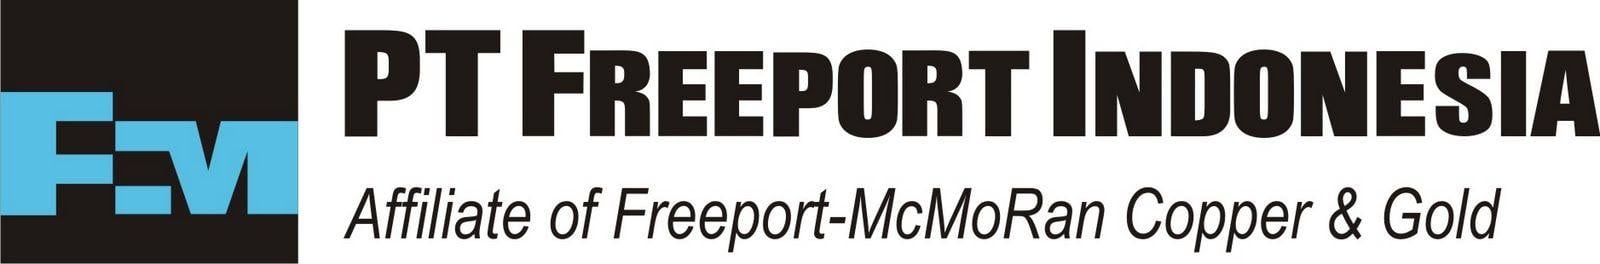 Freeport Logo - Voices Of Leaders, The Next Generation Global Business Platform